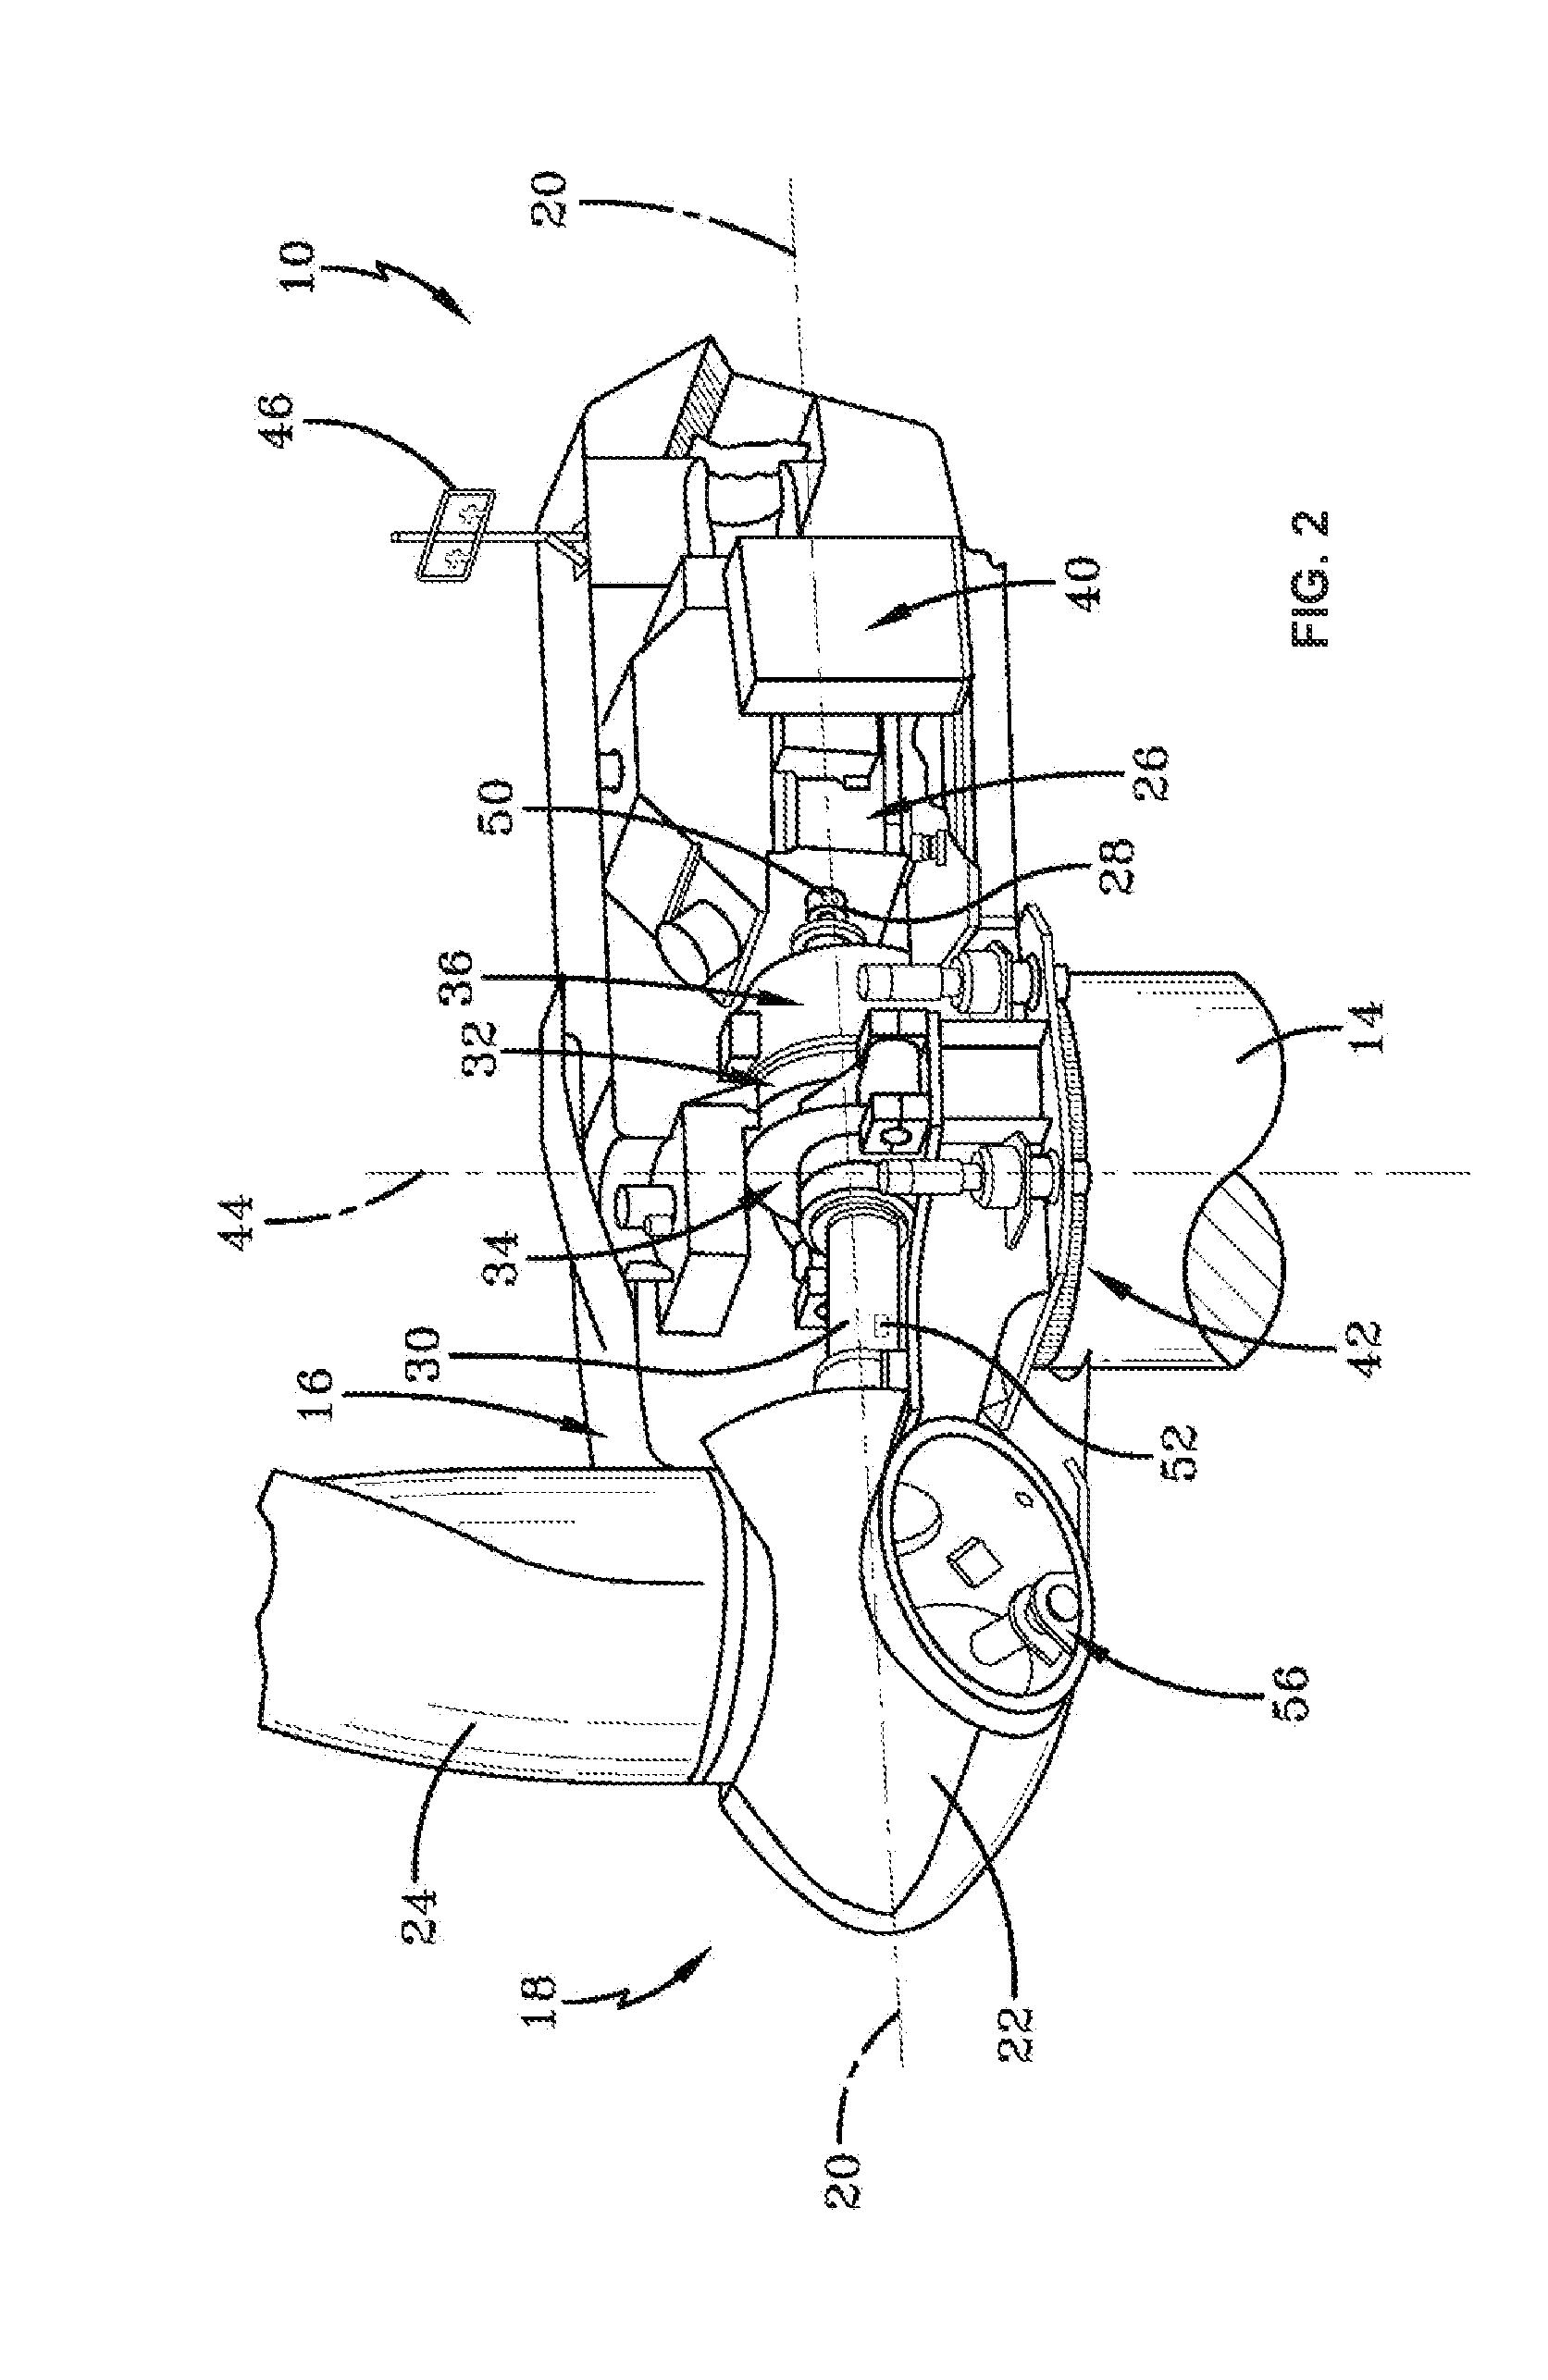 System and method of selecting wind turbine generators in a wind park for curtailment of output power to provide a wind reserve